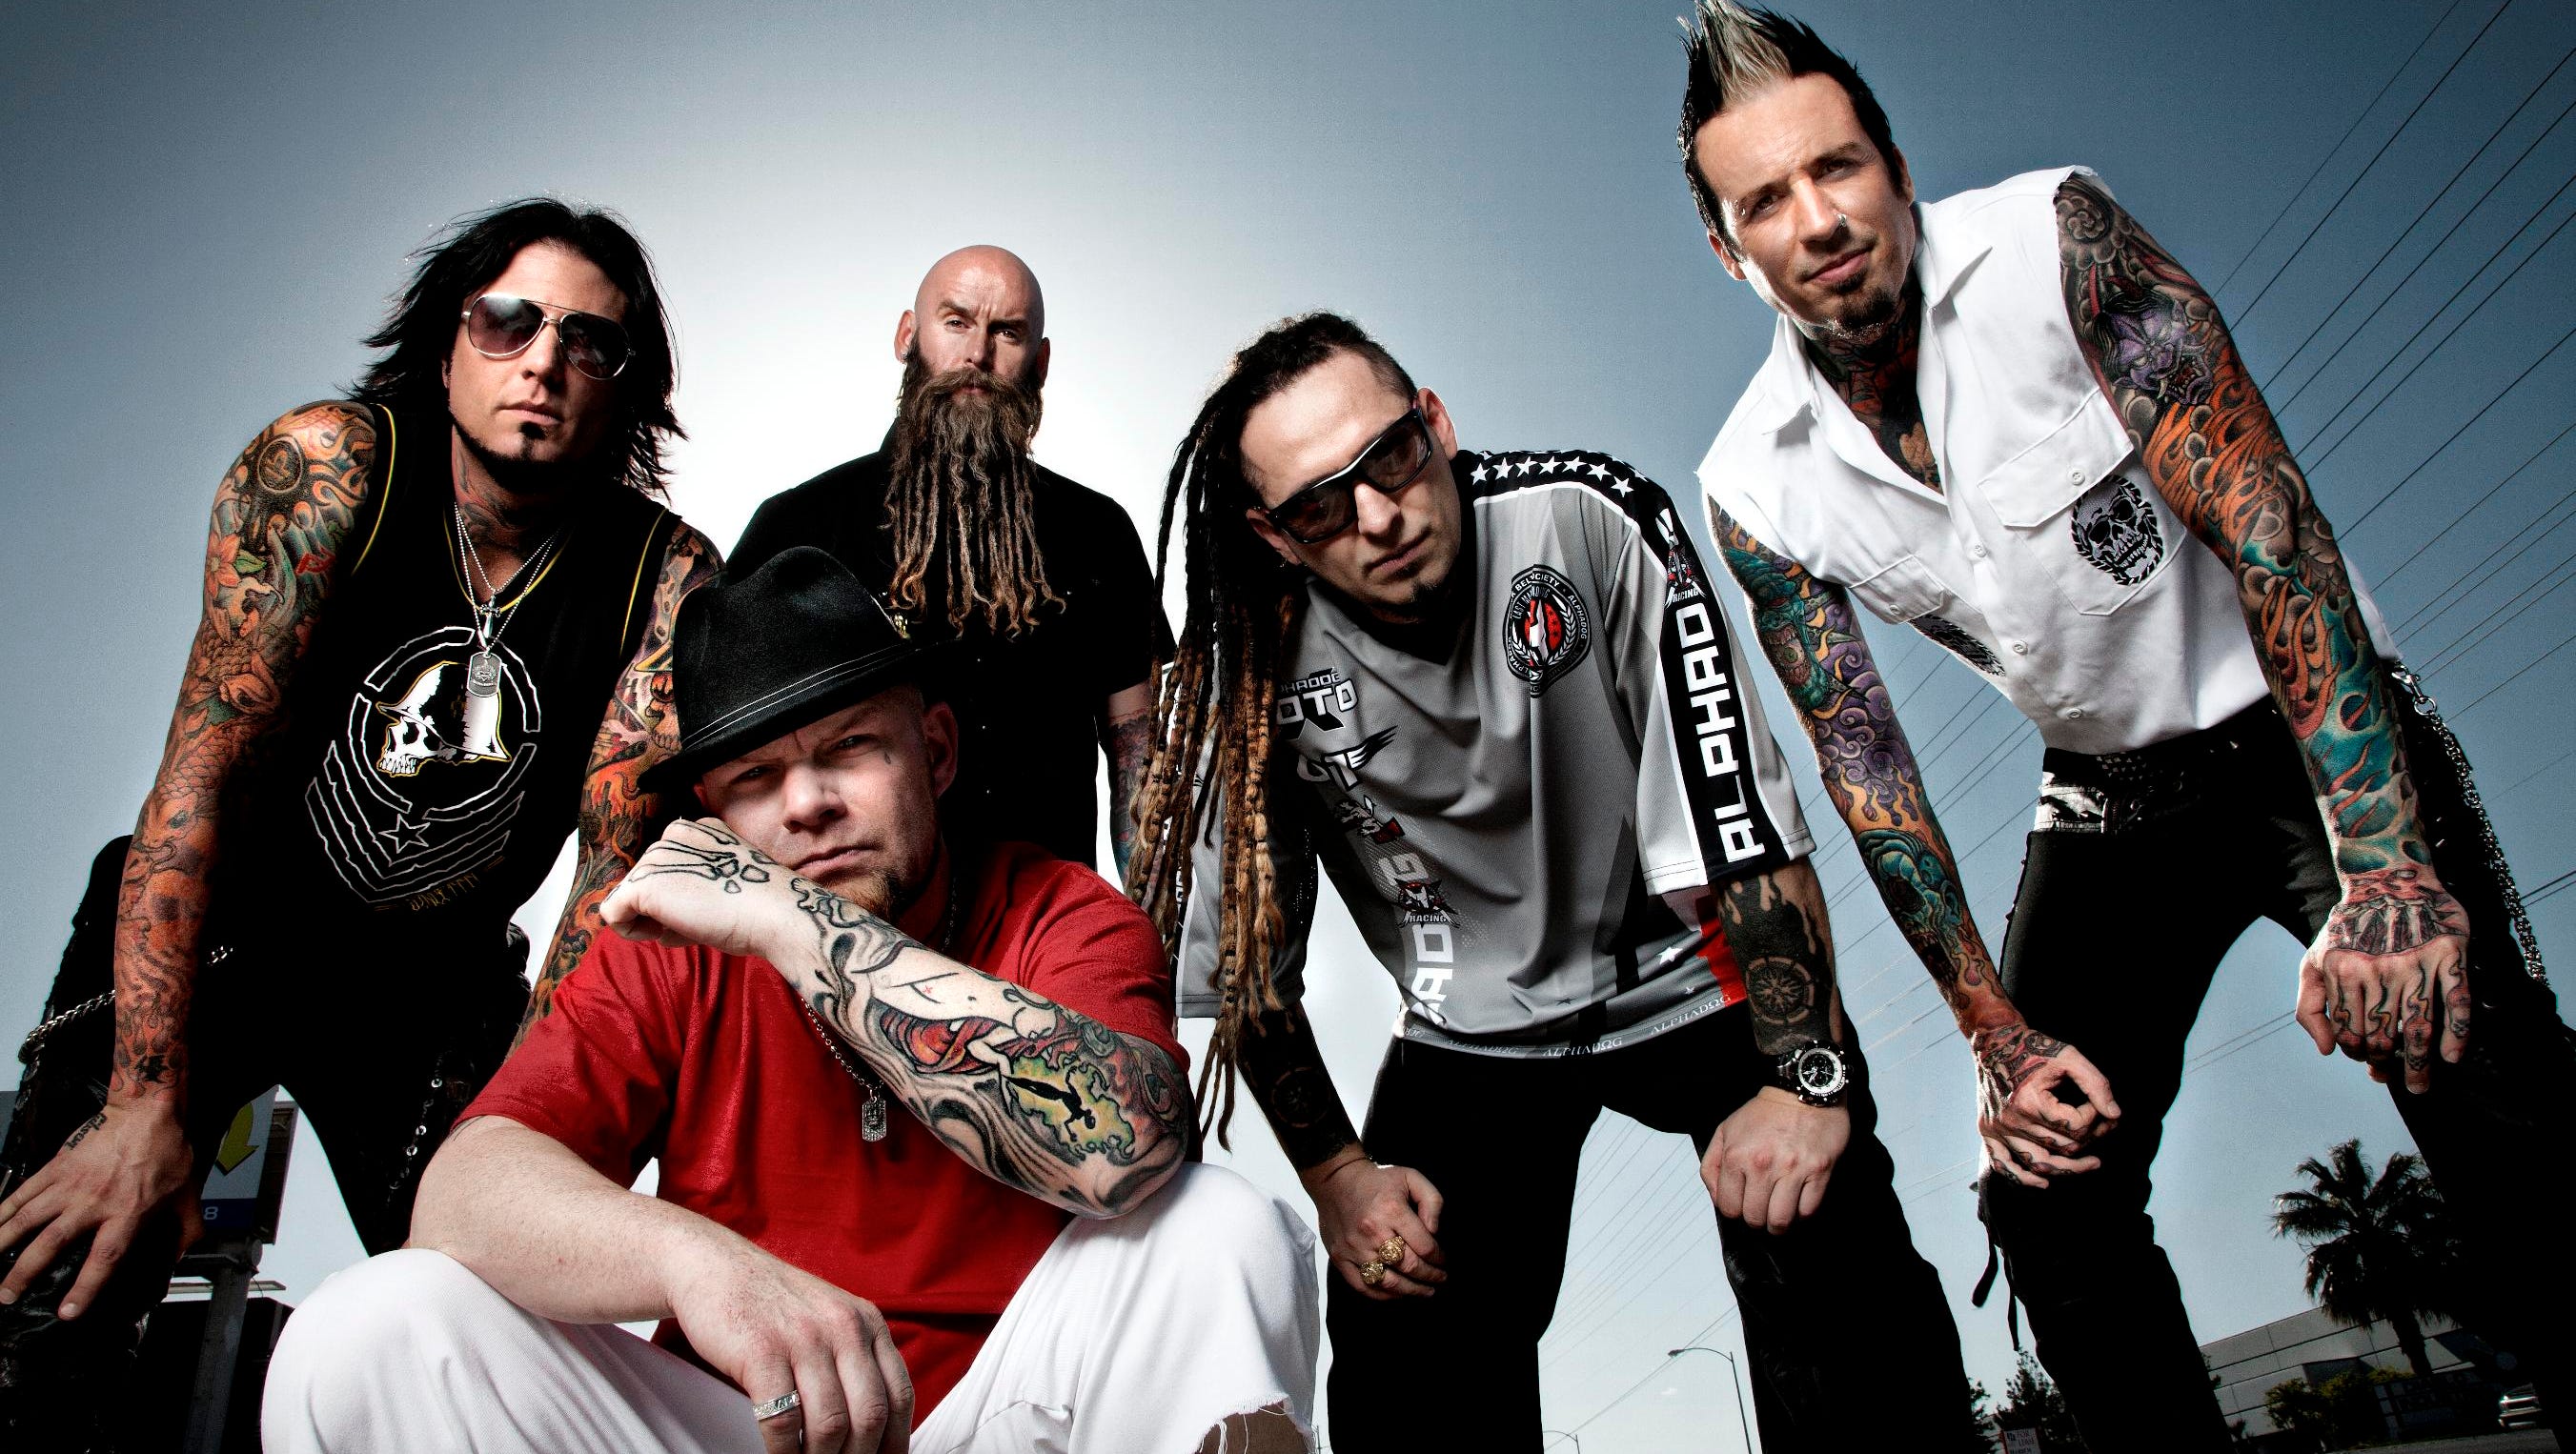 five finger death punch youtube hell